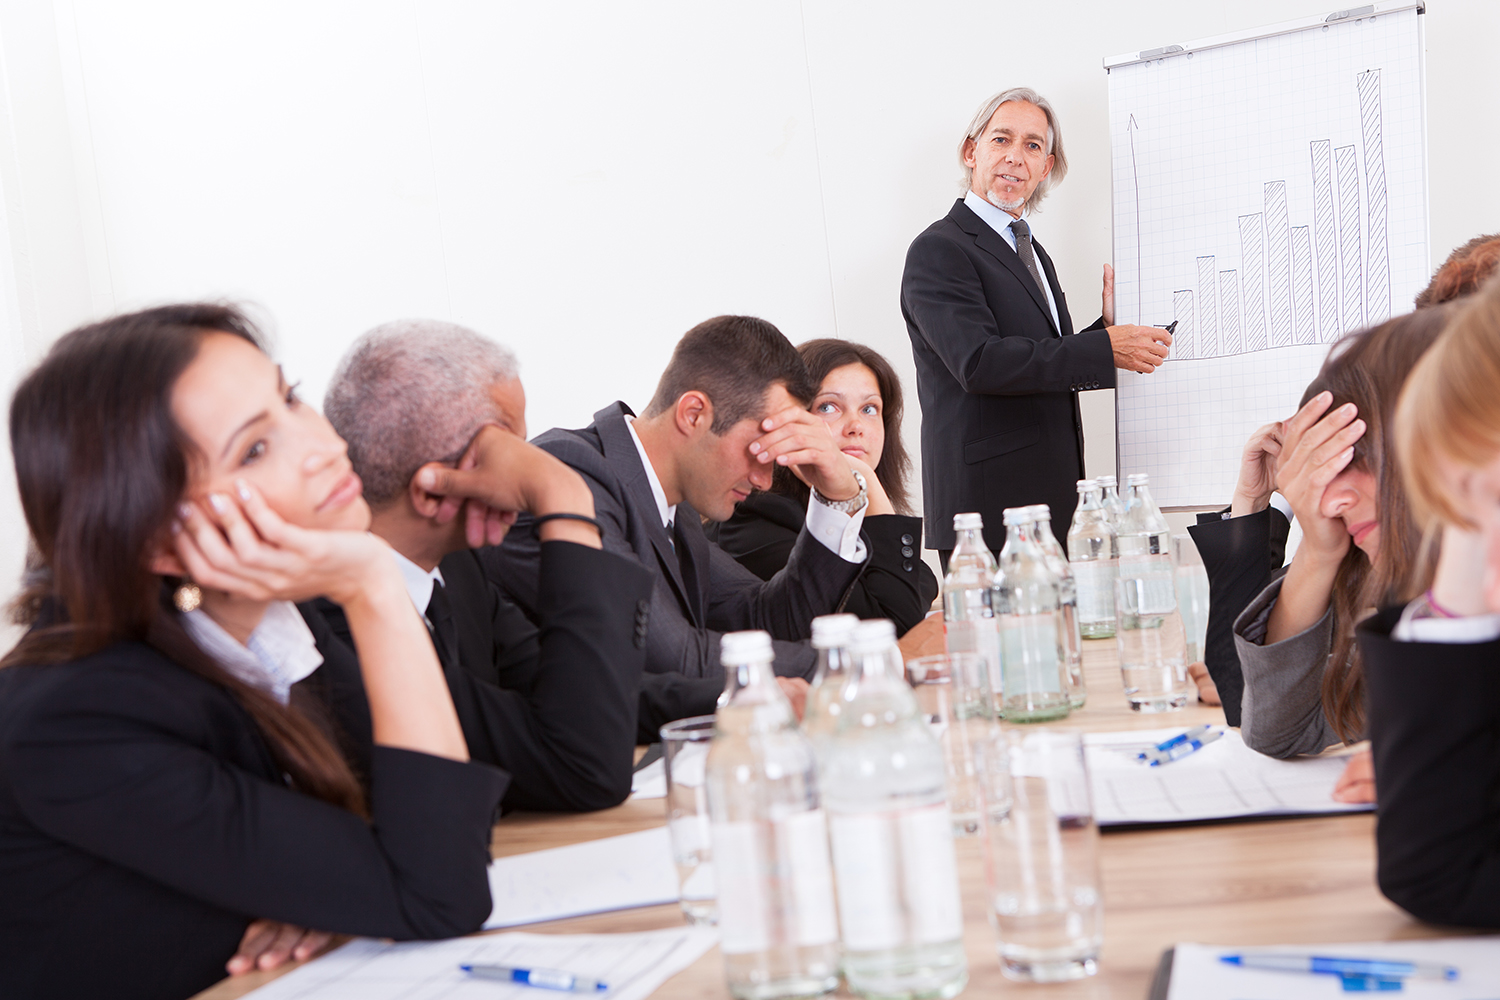 Sales associate leads unsuccessful customer education meeting with potential clients